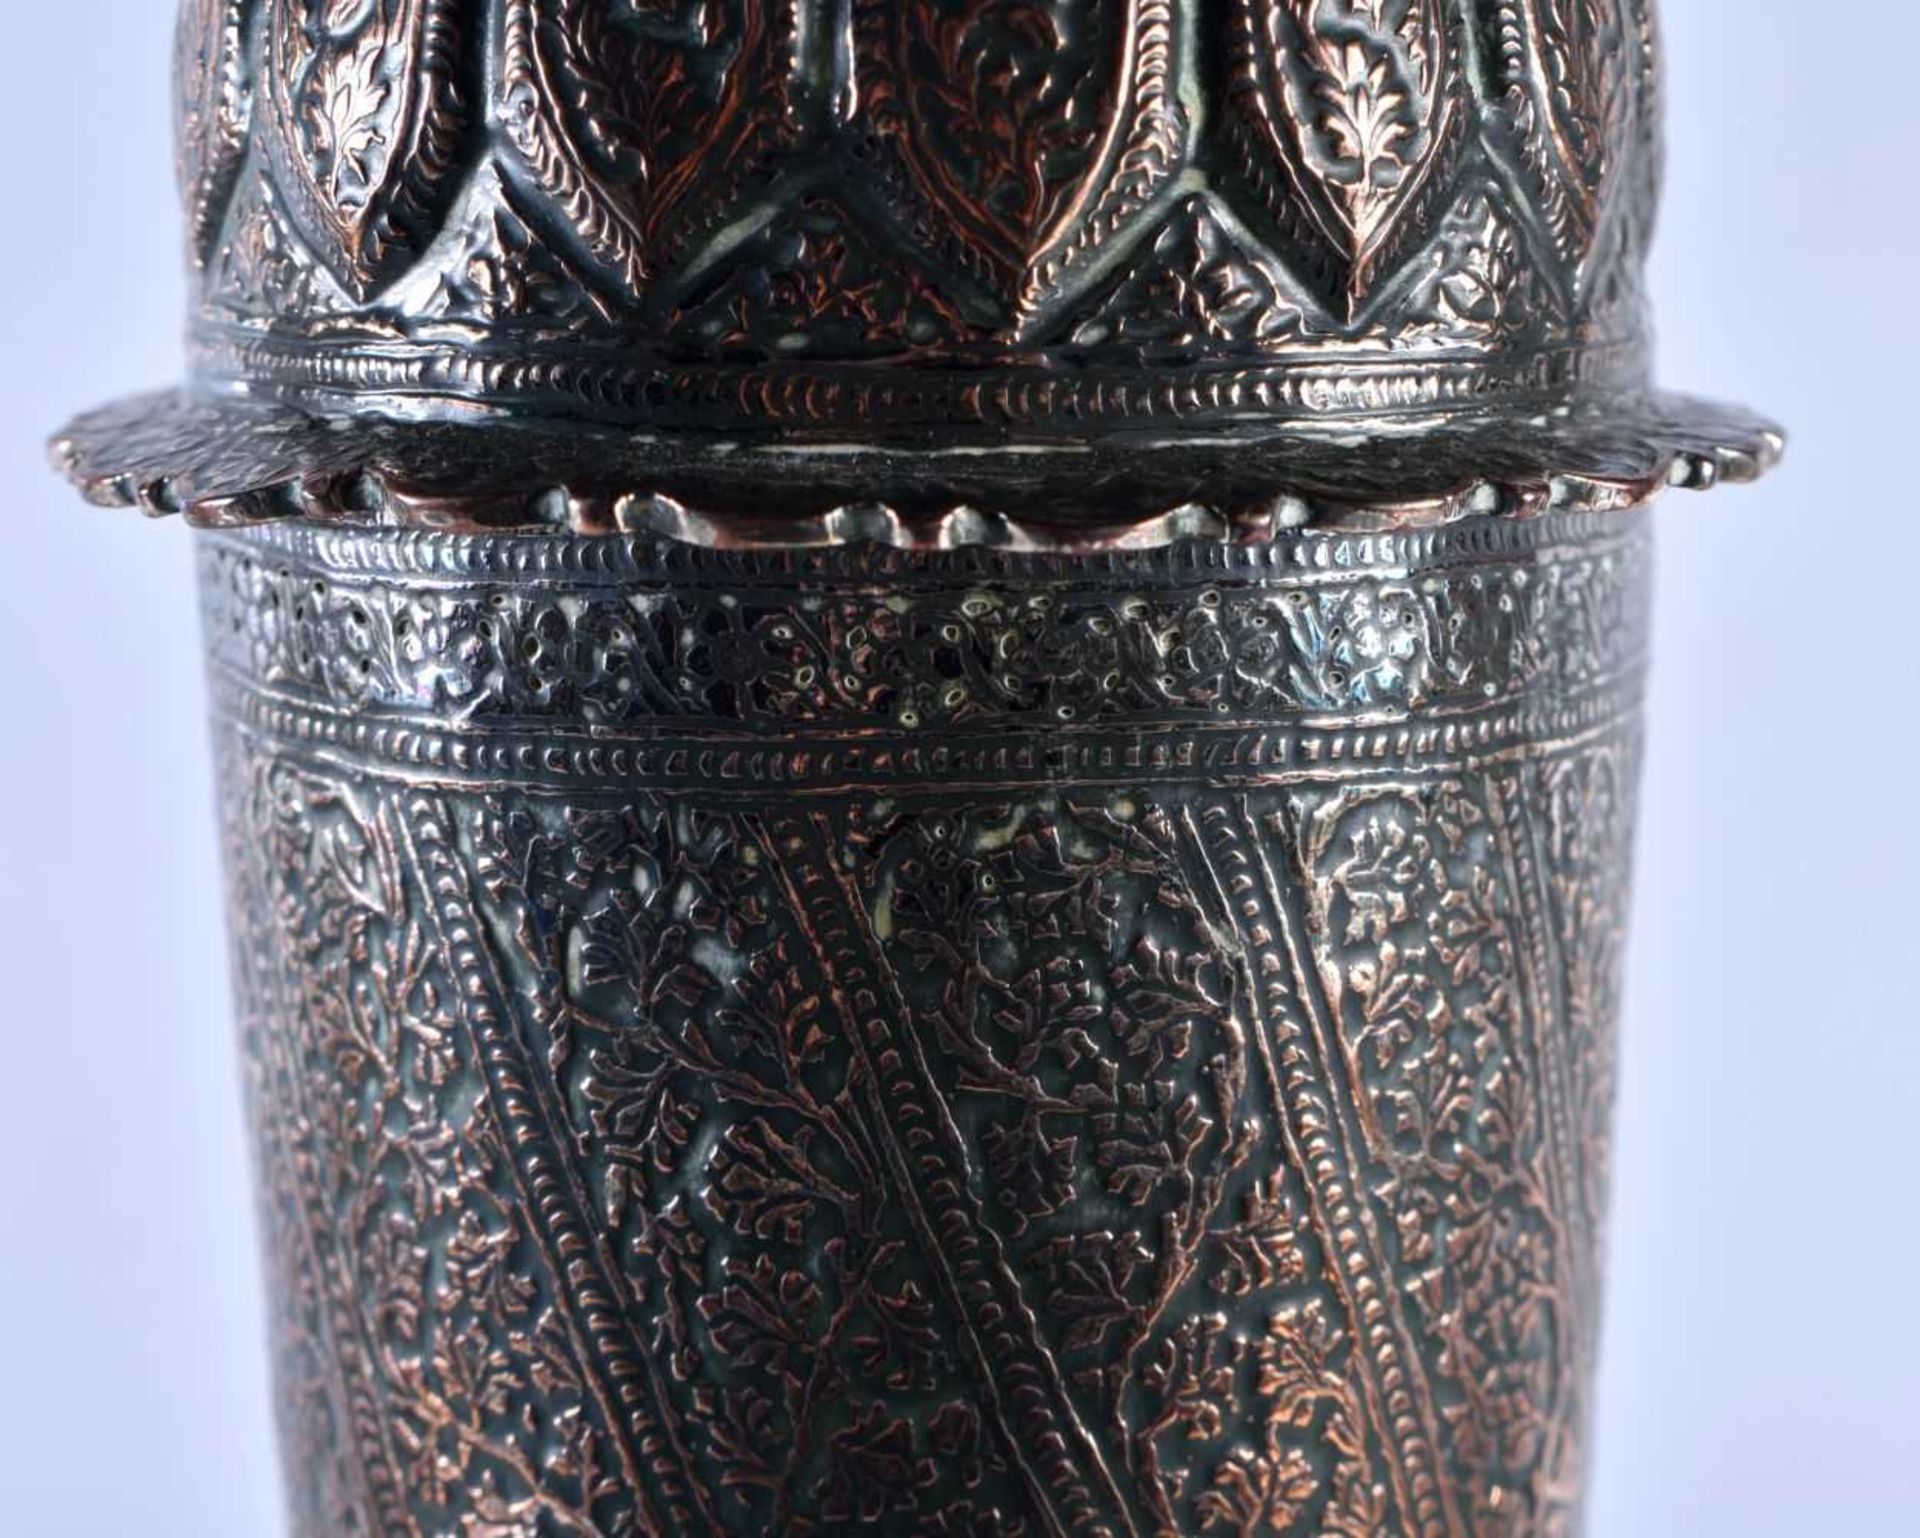 A VERY LARGE 19TH CENTURY MIDDLE EASTERN ISLAMIC BRONZE COPPER ALLOY VASE AND COVER decorated with - Image 3 of 7